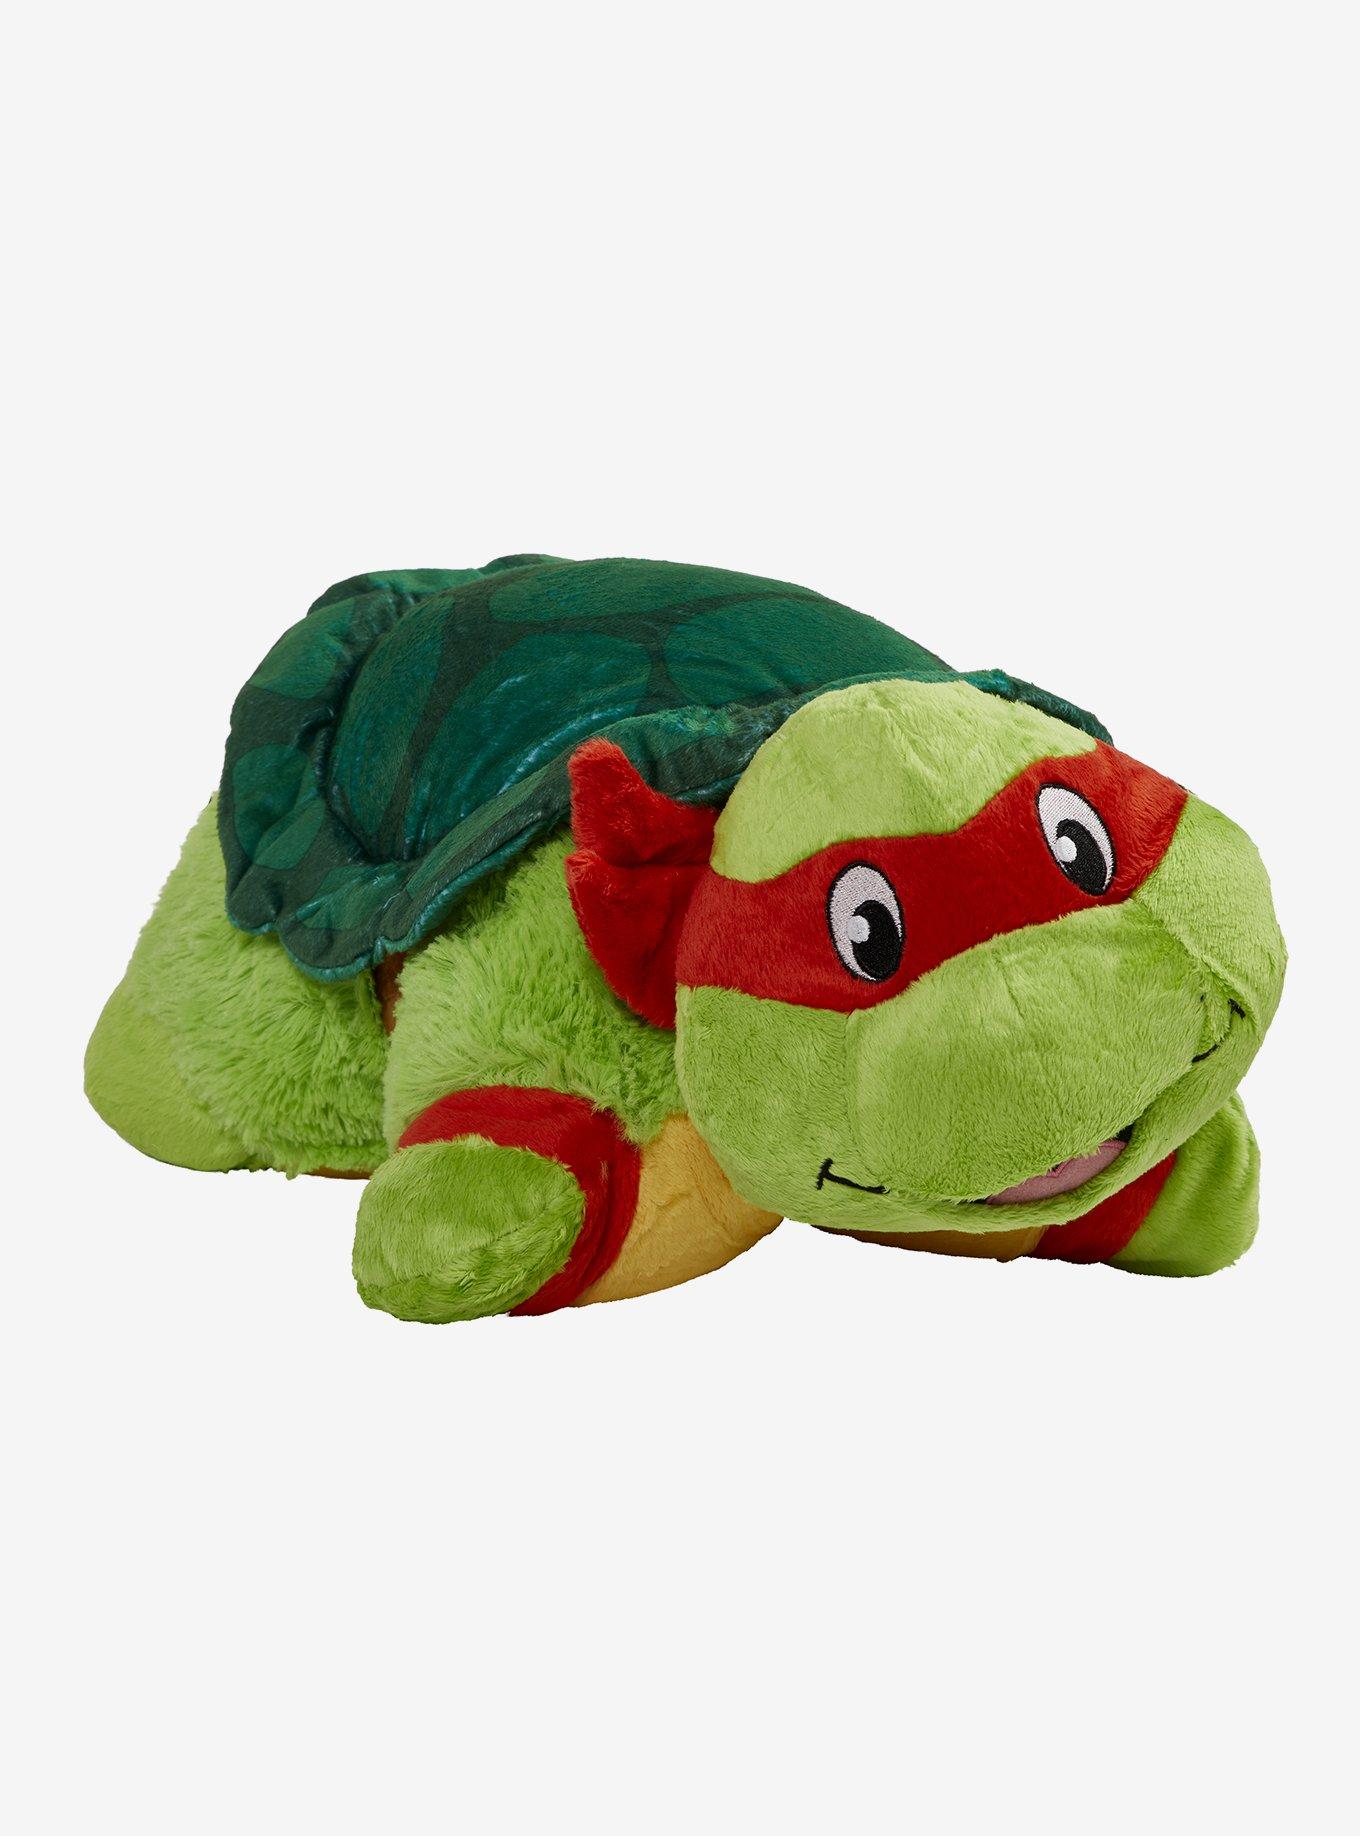 Minecraft Frog Pillow My World Frog Multicolored Weird Children Plush Toys  For Kids Fans Gifts